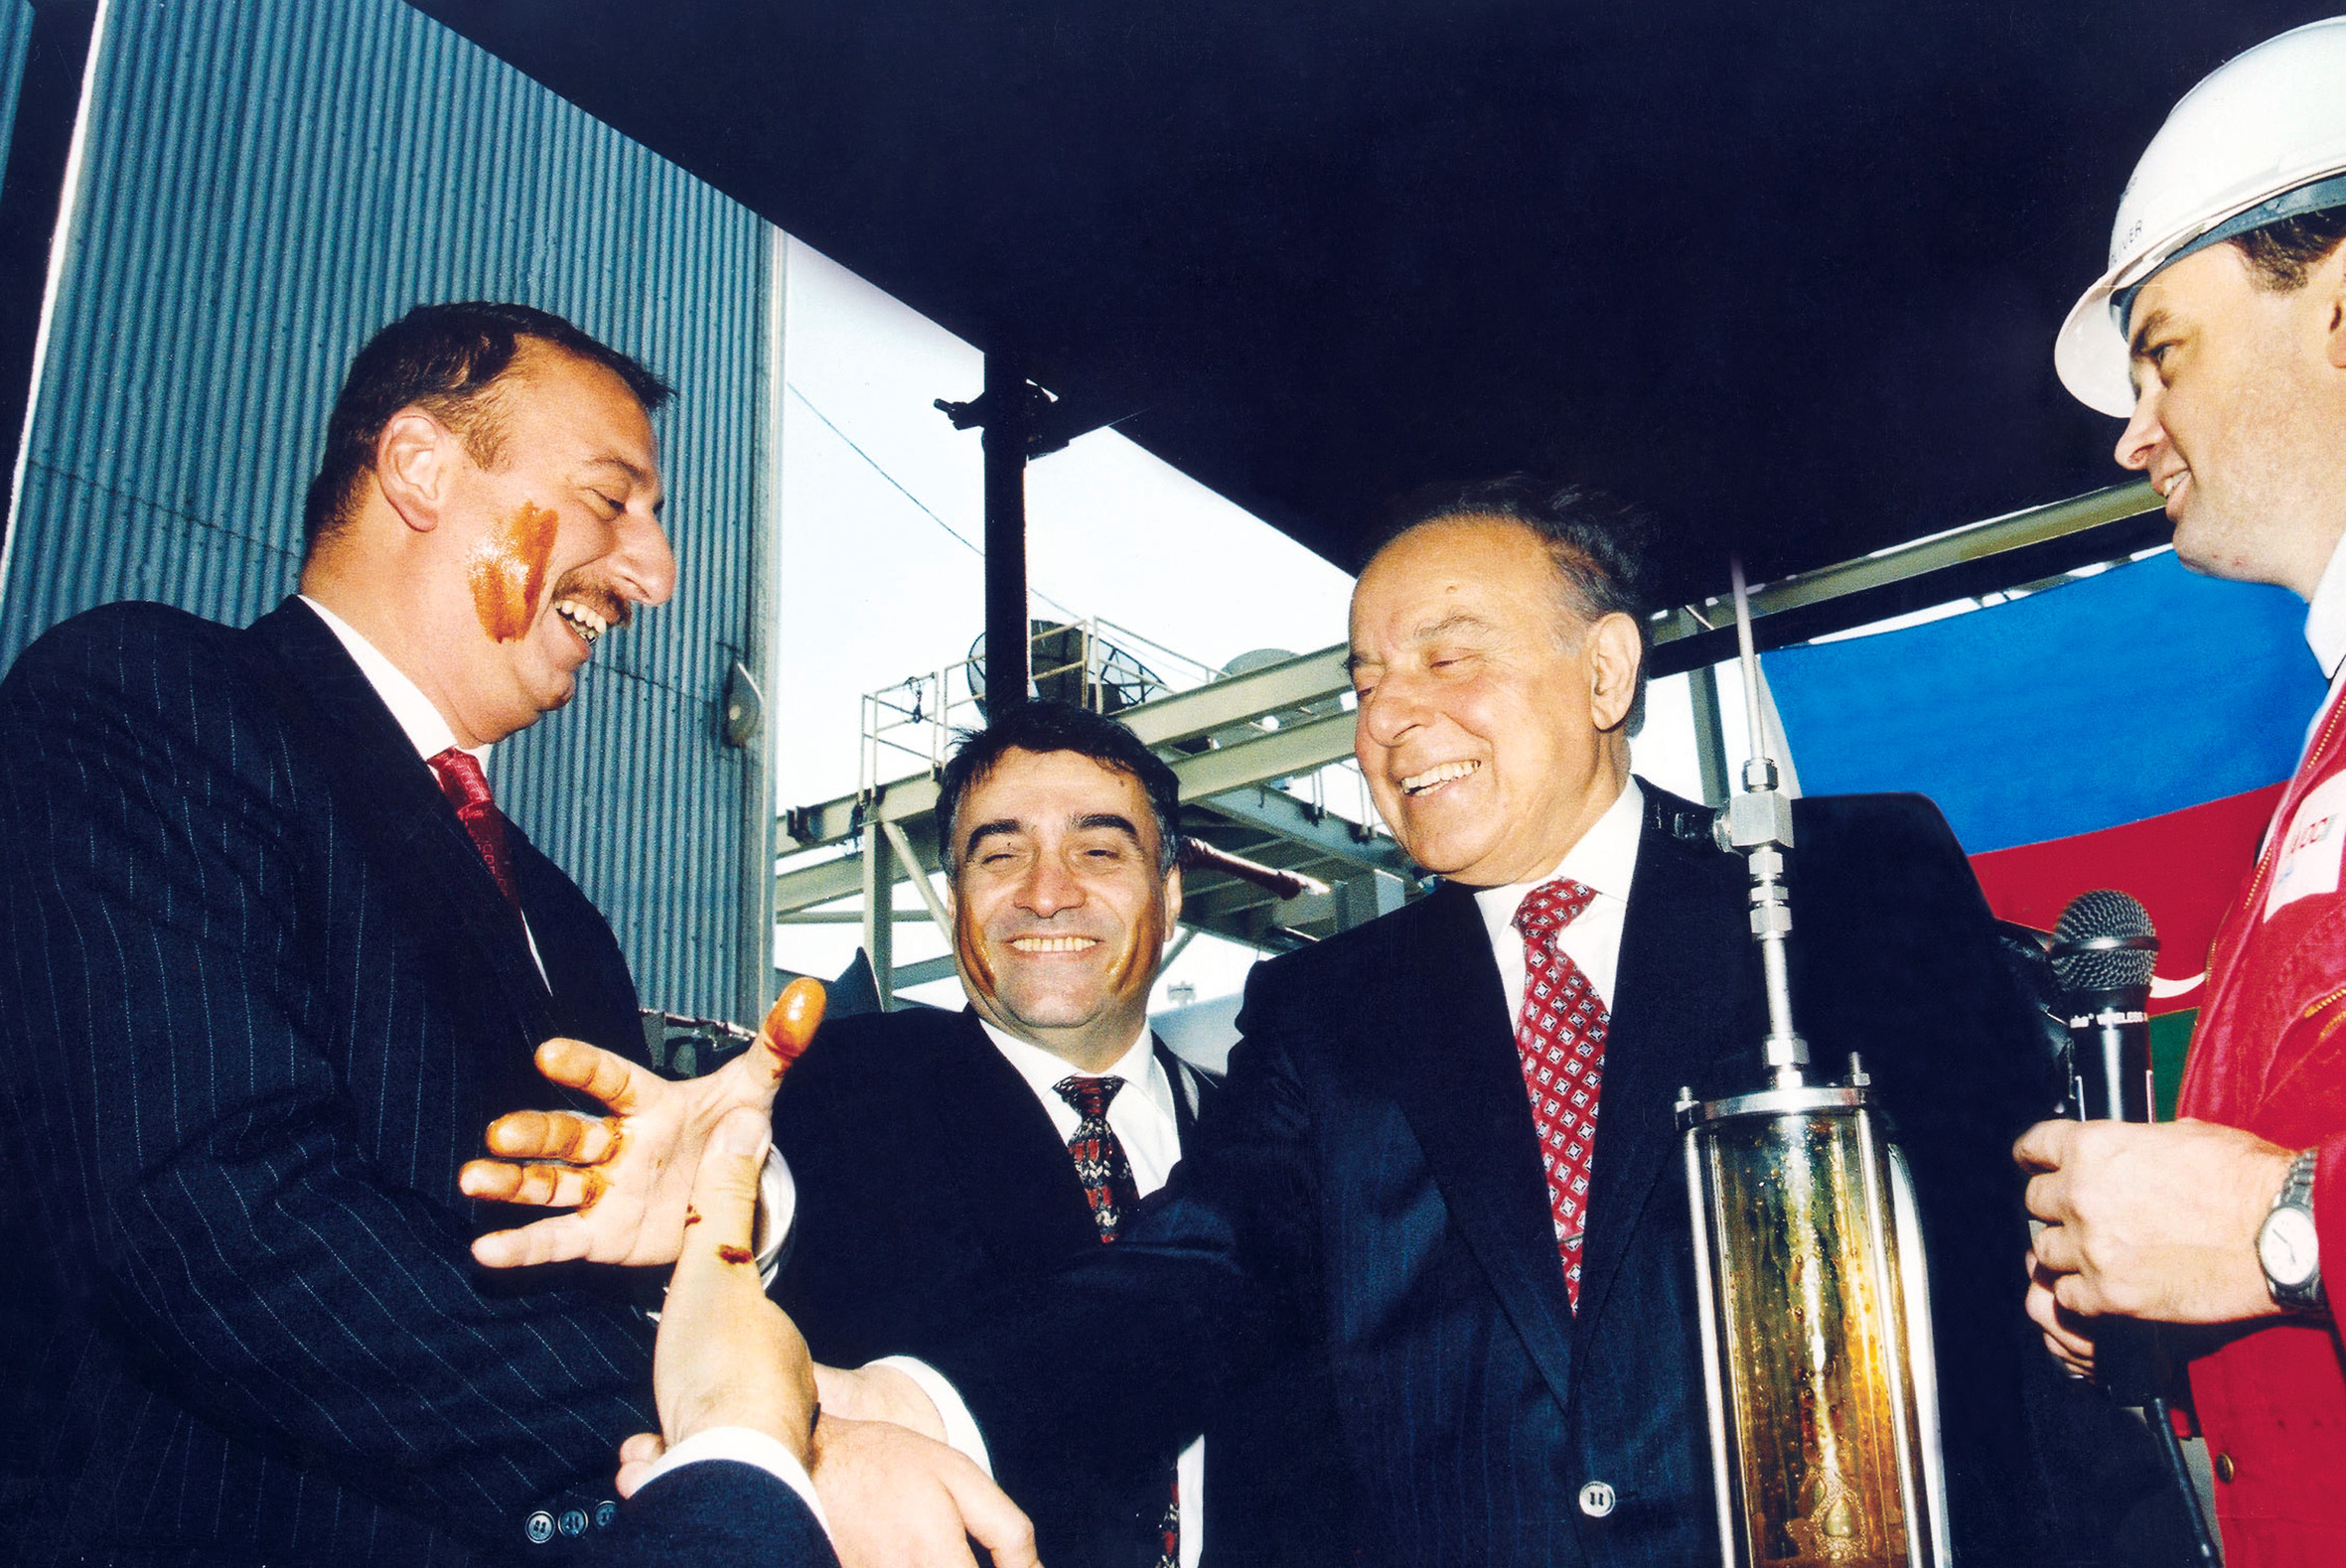 Azerbaijan Celebrates 25 Years Since 'The Contract Of The Century' Was Signed - Caspian News